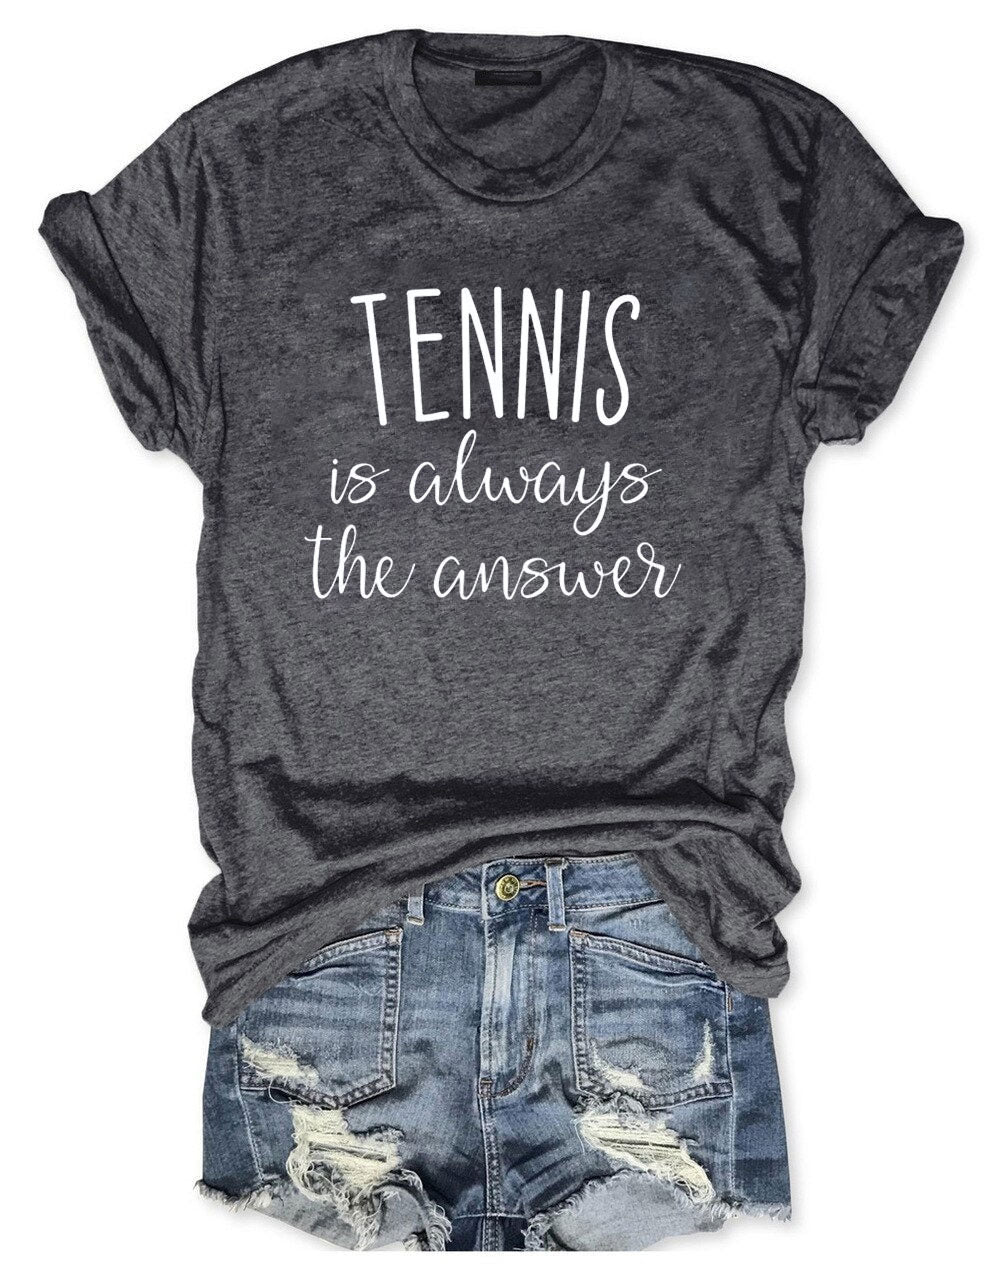 Tennis is Always The Answer T-Shirt